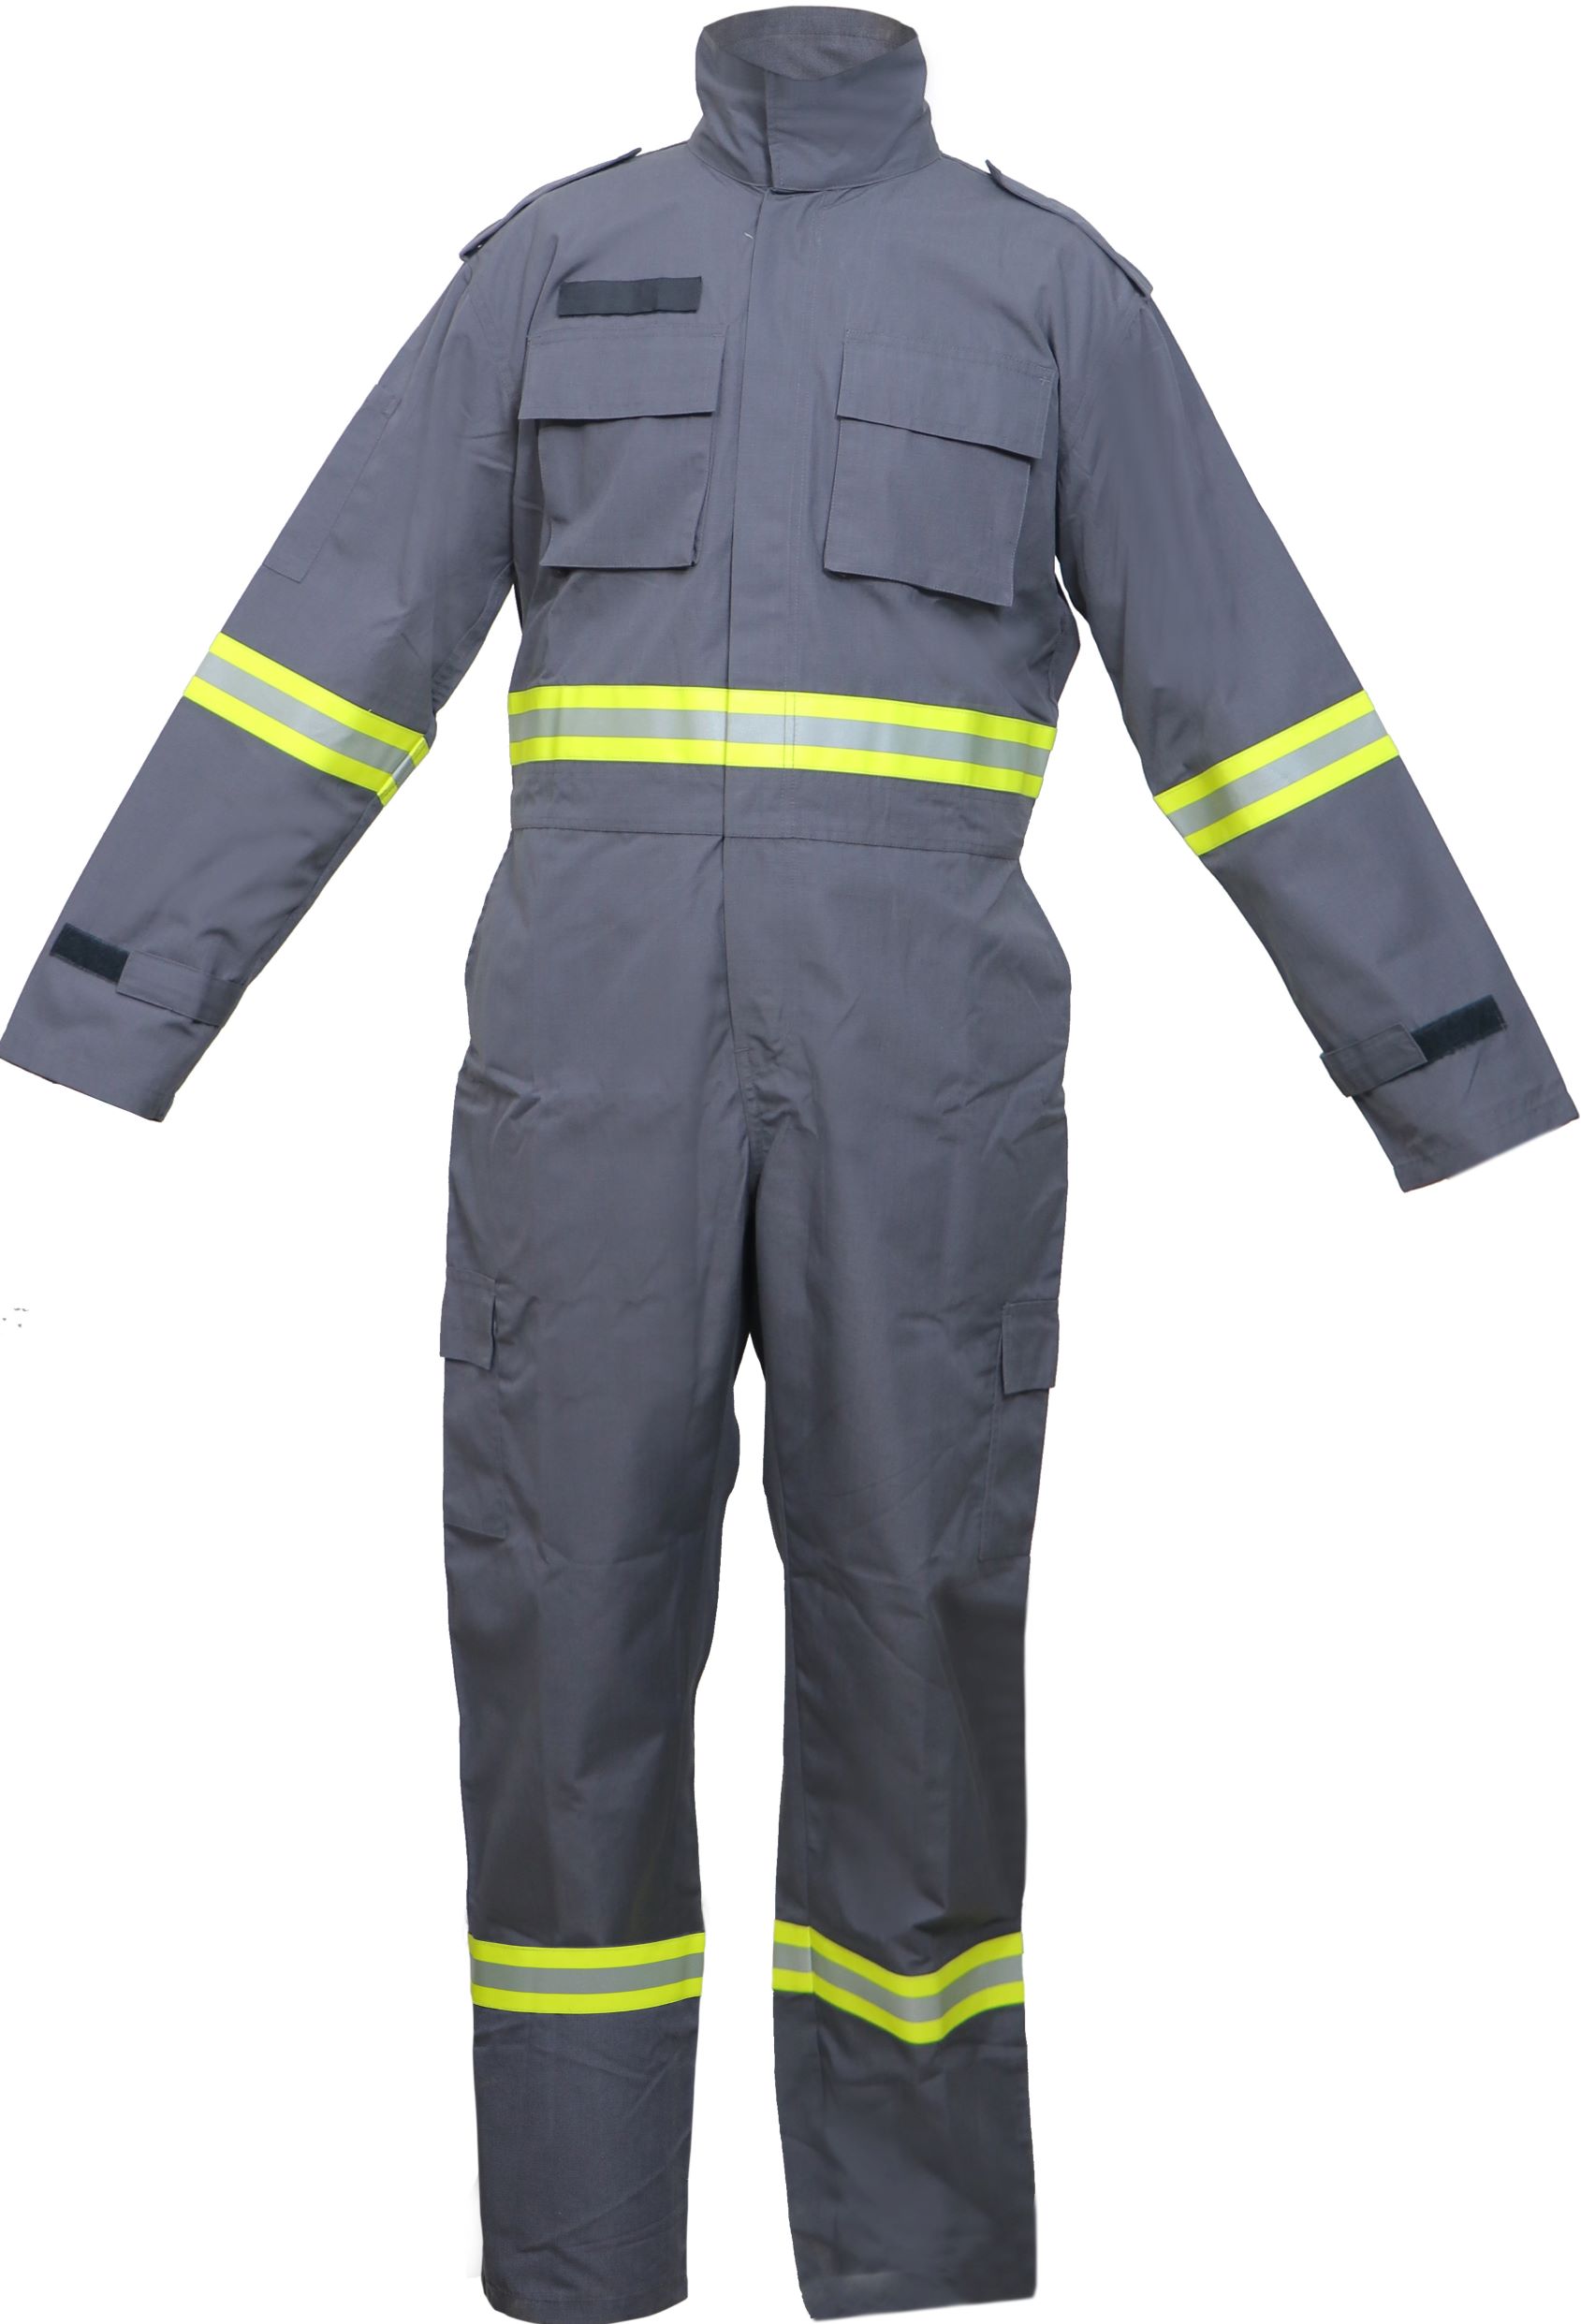 INHERENT FR 625 COVERALL